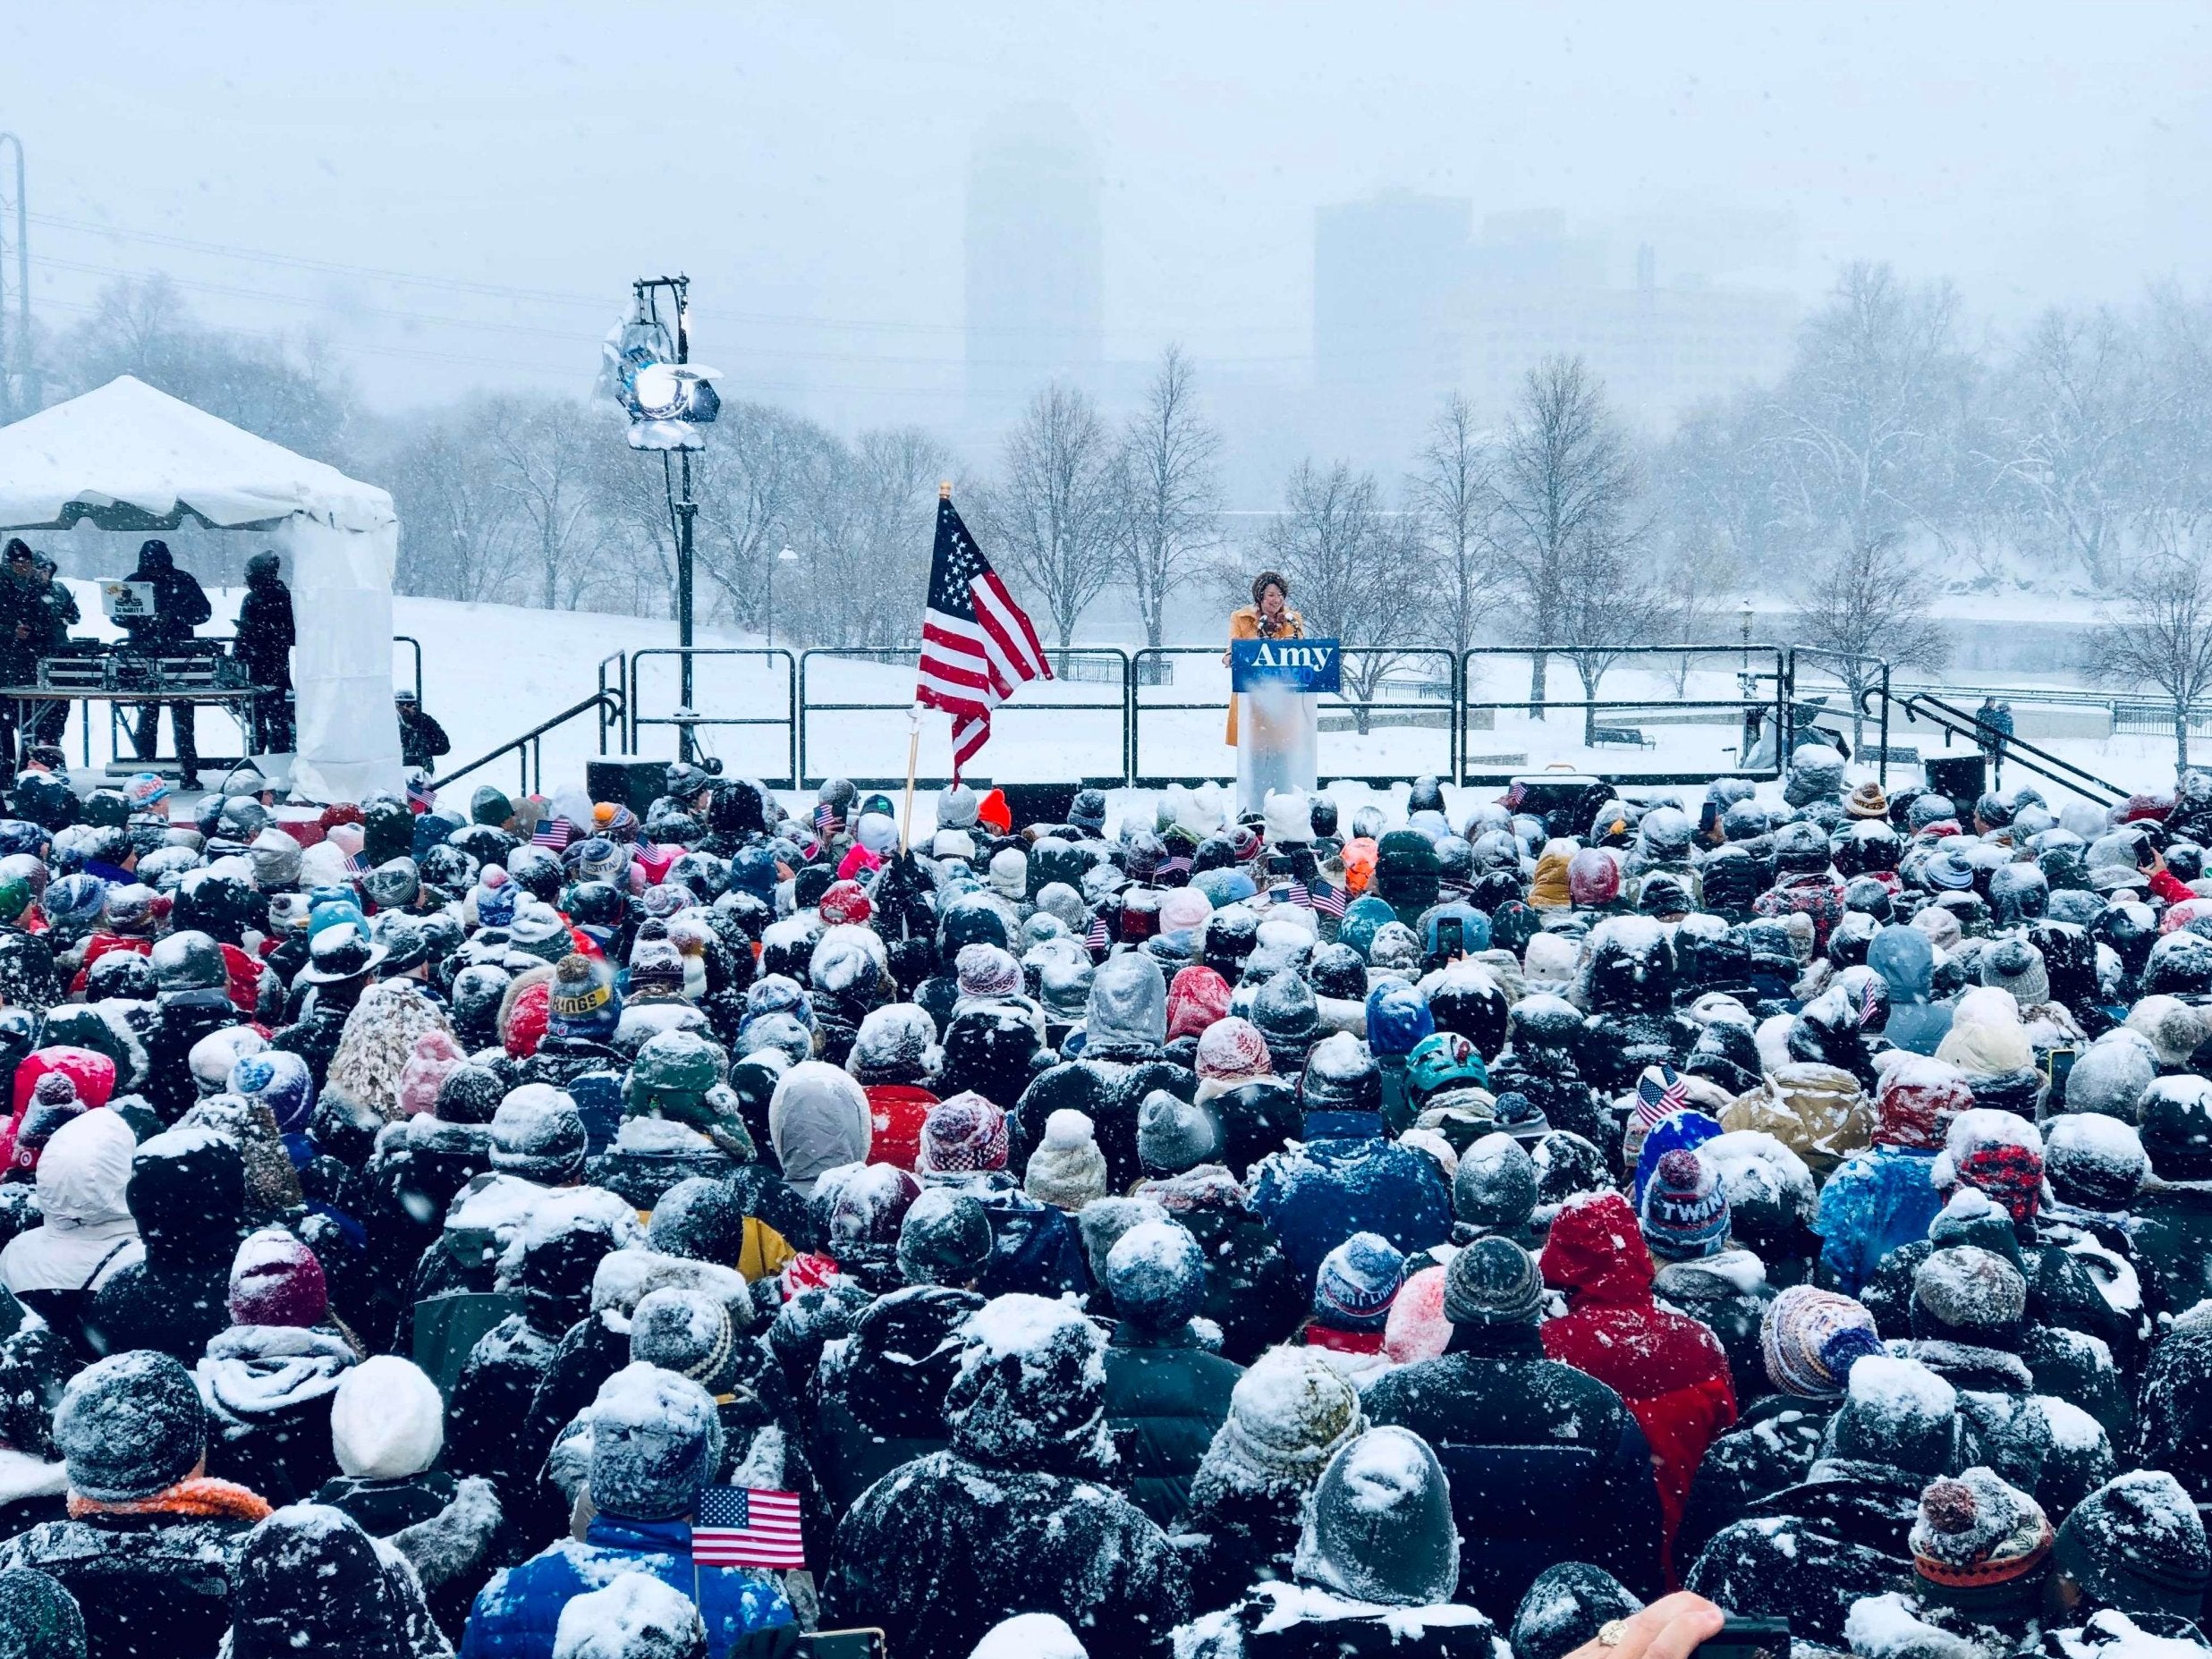 Amy Klobuchar announced that she was putting herself forward in the middle of the snow in Minnesota on the weekend